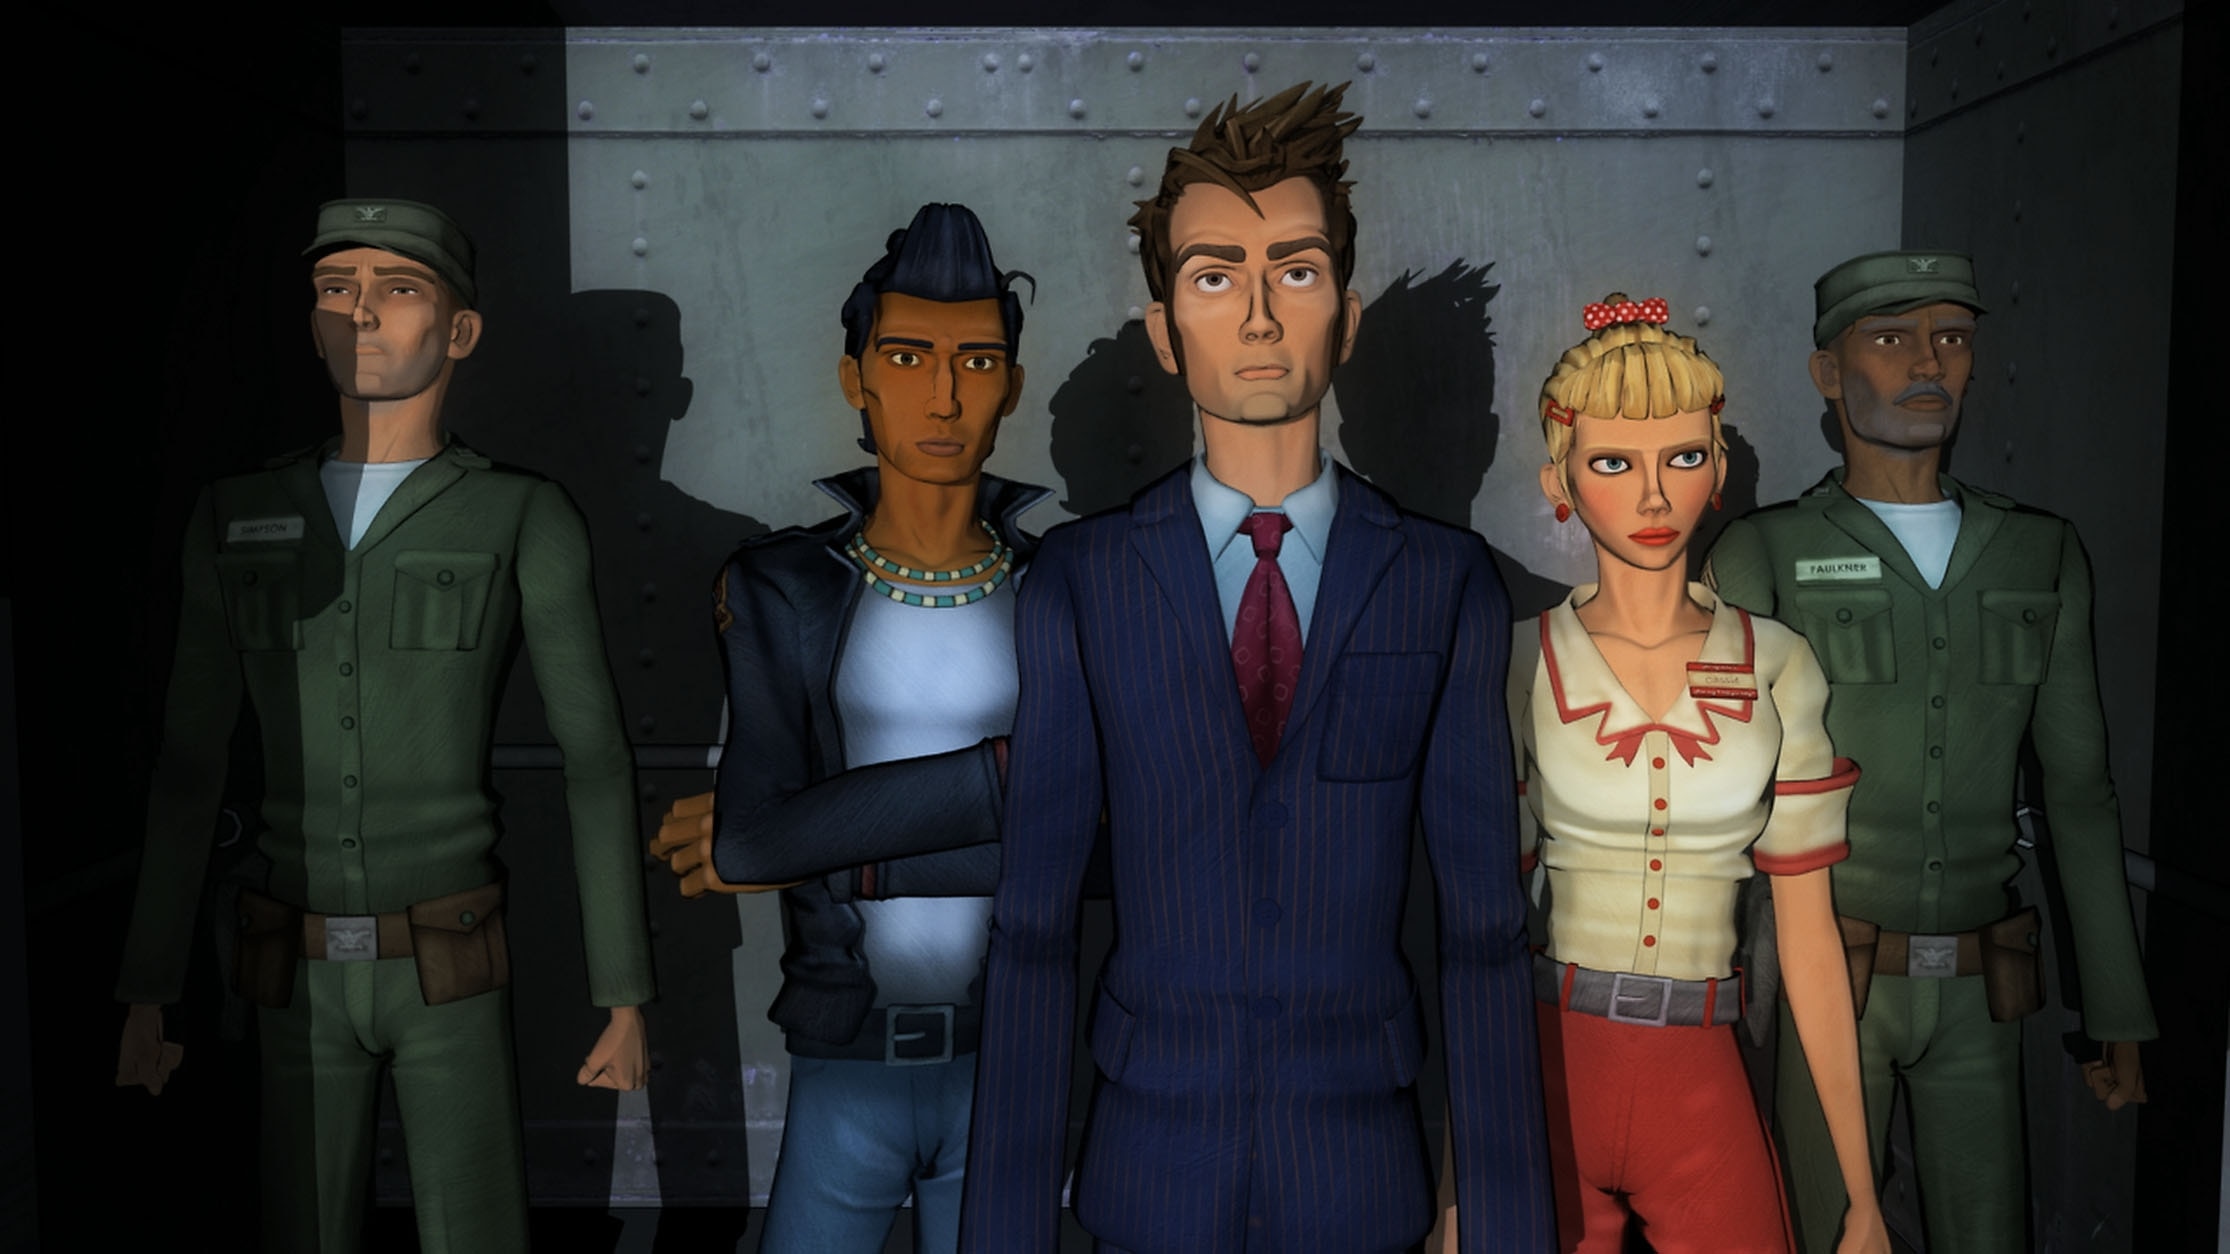 Screenshot from the animated Tenth Doctor adventure 'Dreamland'